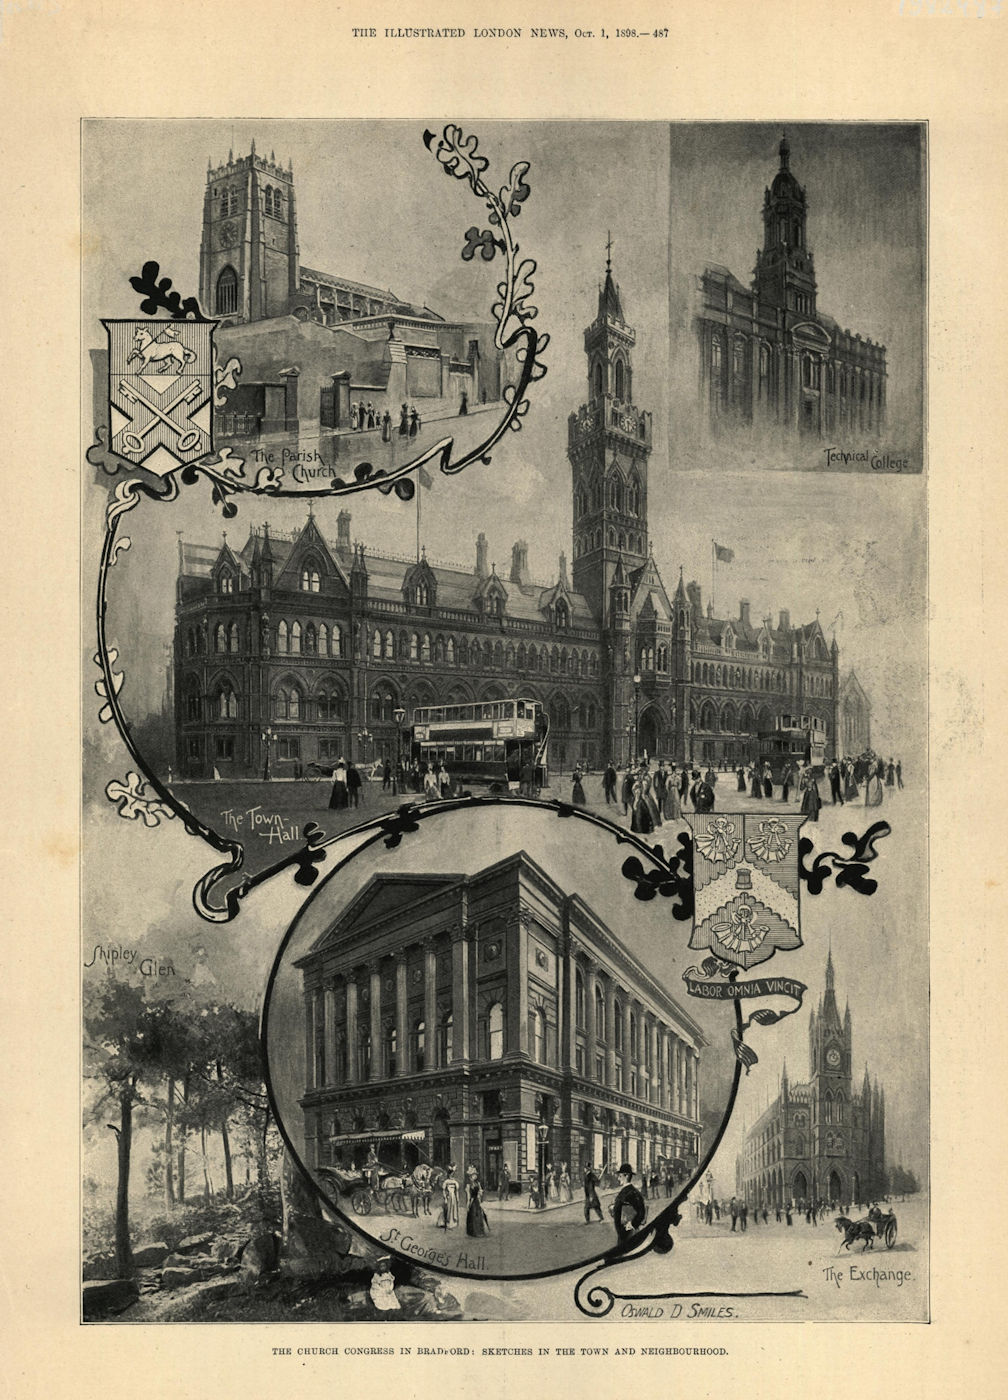 Bradford: Sketches in the town & neighbourhood. Yorkshire 1898 ILN full page